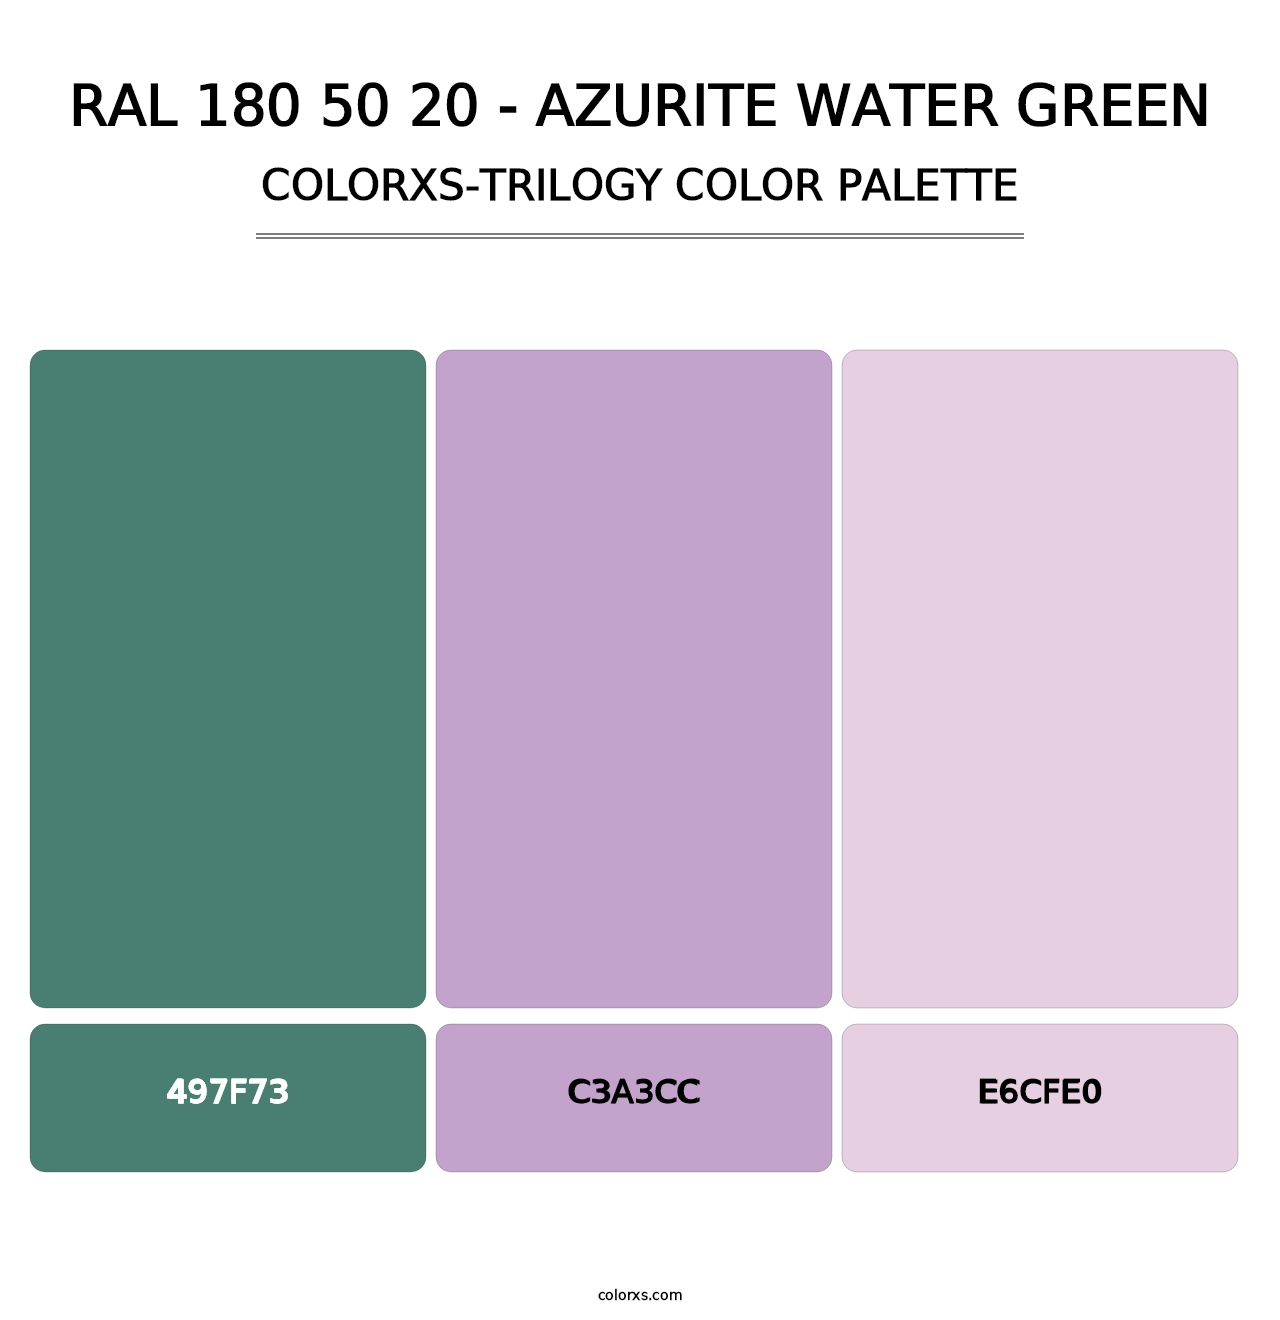 RAL 180 50 20 - Azurite Water Green - Colorxs Trilogy Palette